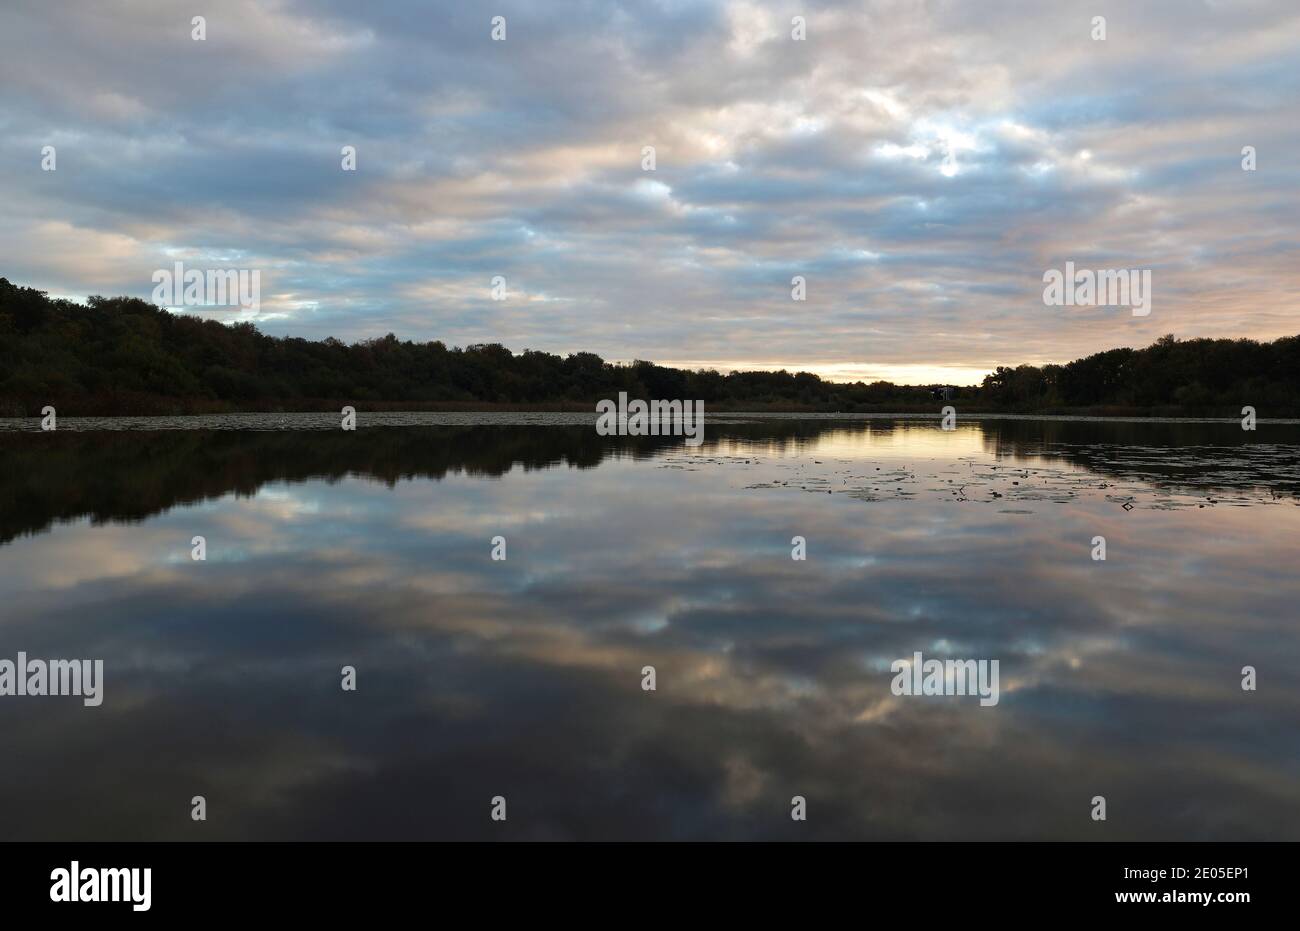 The rising sun sprays an arch of light into the cloud cover above the glass-like water of Hatch Pond. Trees line the horizon of this peaceful scene. Stock Photo